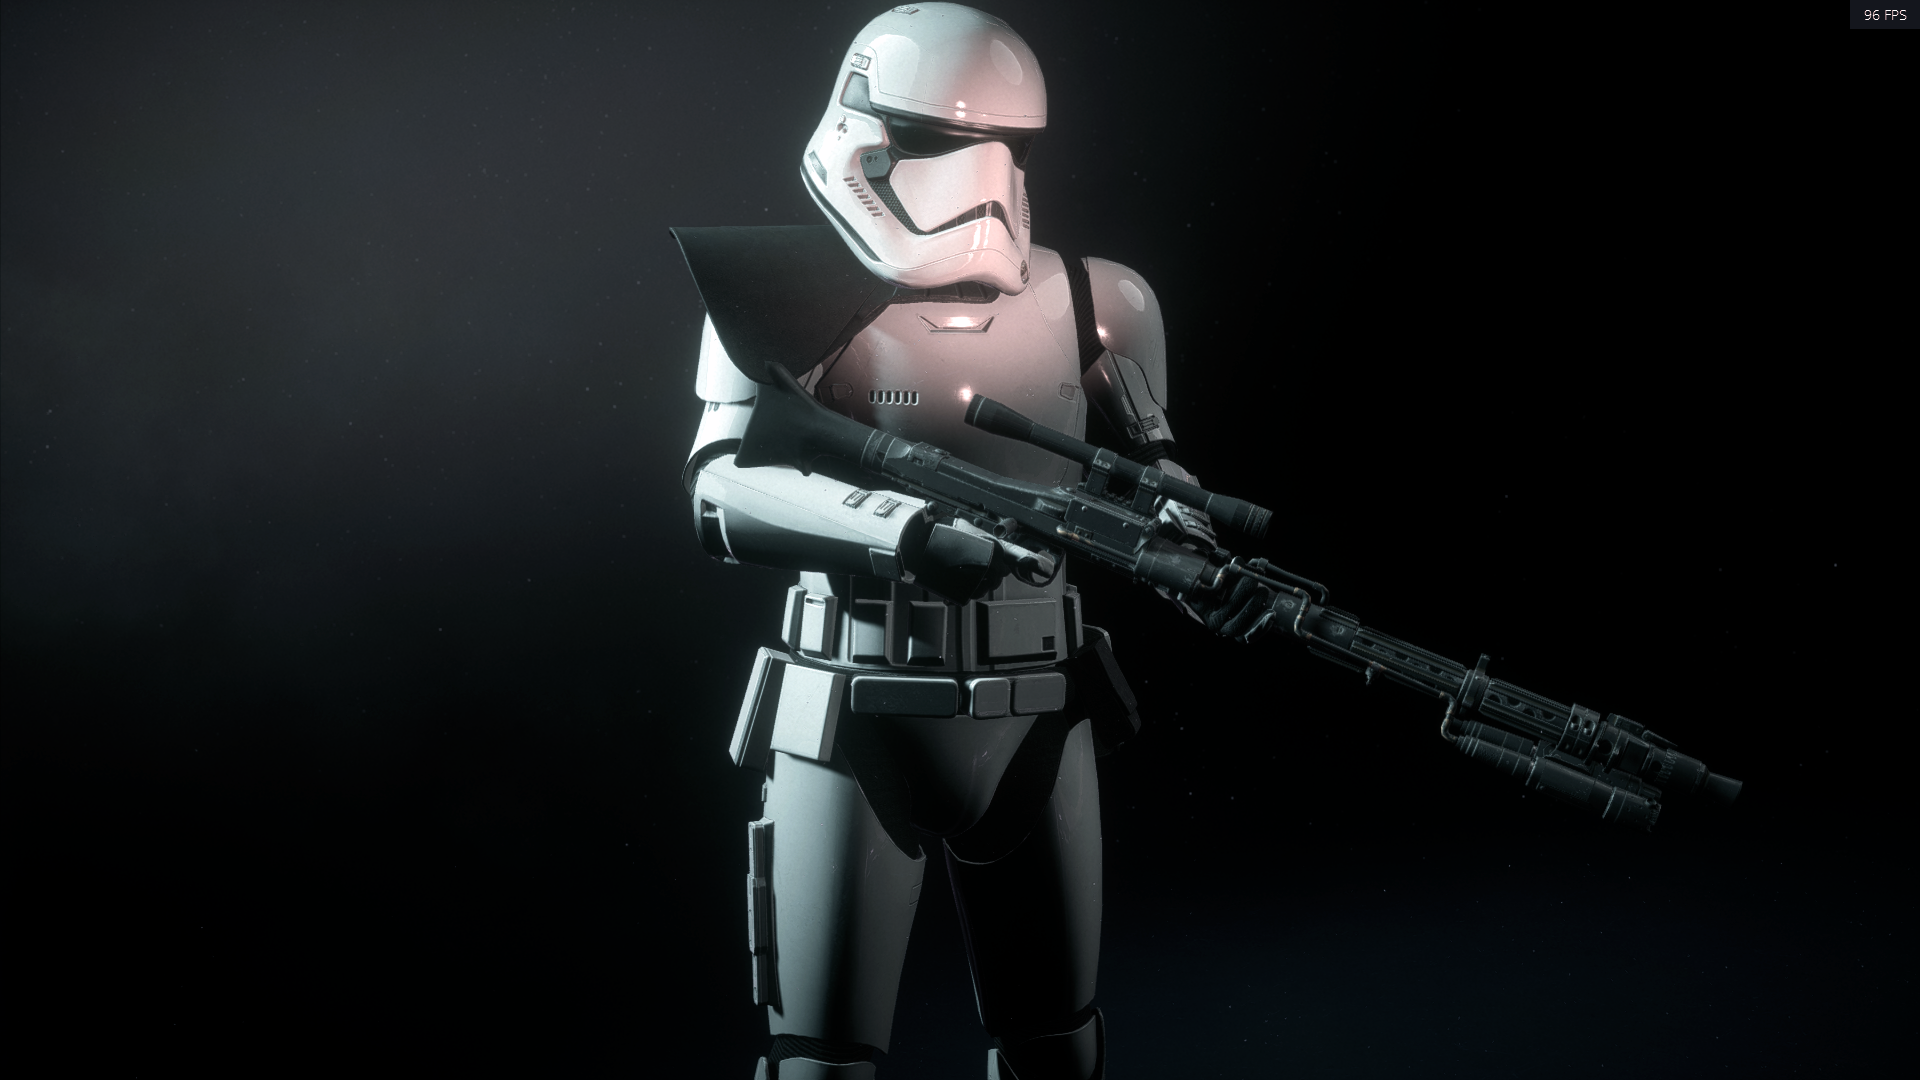 General 1920x1080 Star Wars Battlefront II screen shot video games PC gaming Imperial Stormtrooper stormtrooper Imperial Forces Star Wars